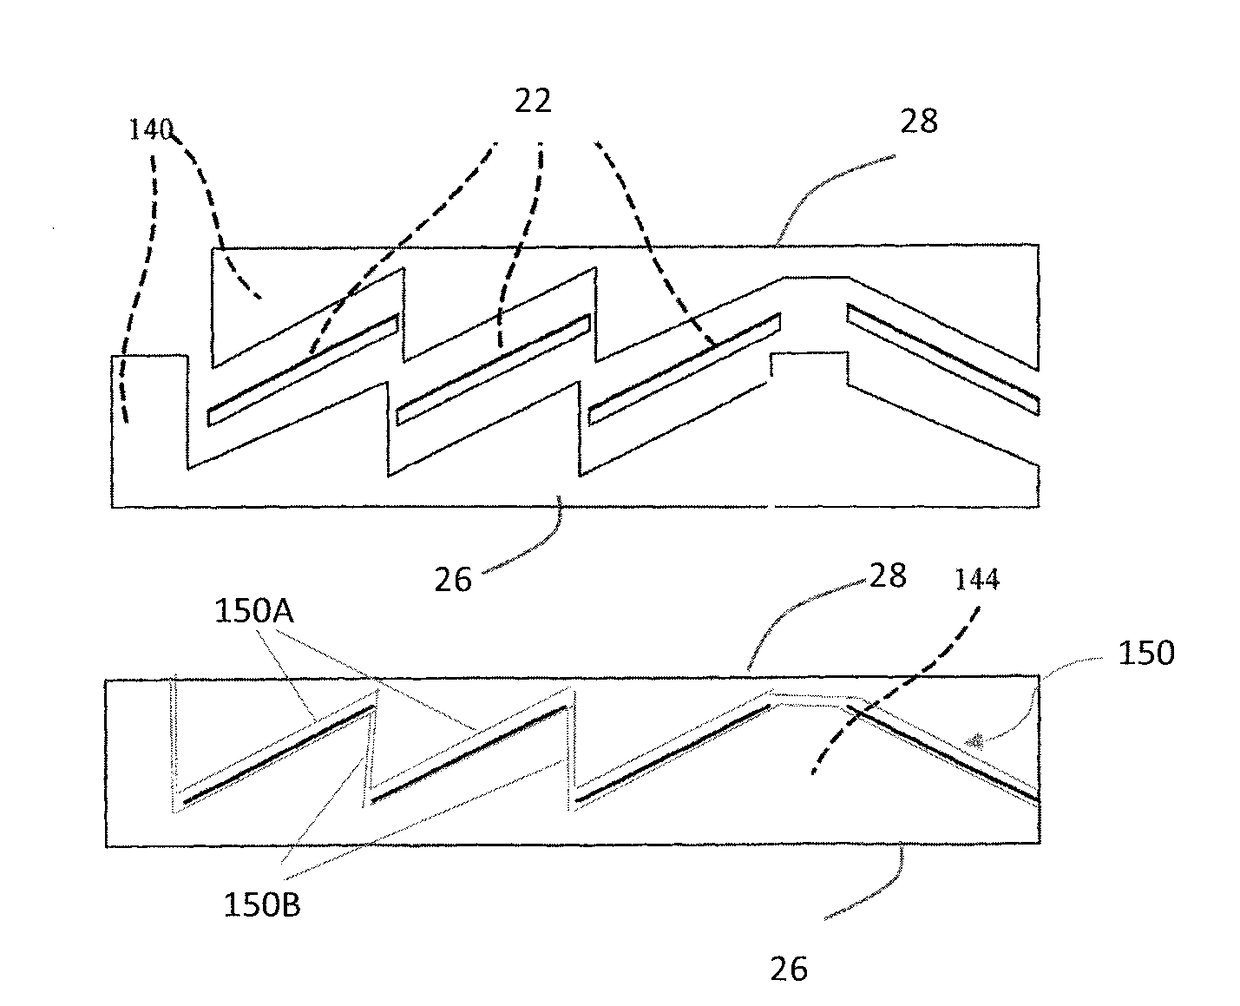 Light-guide optical element and method of its manufacture